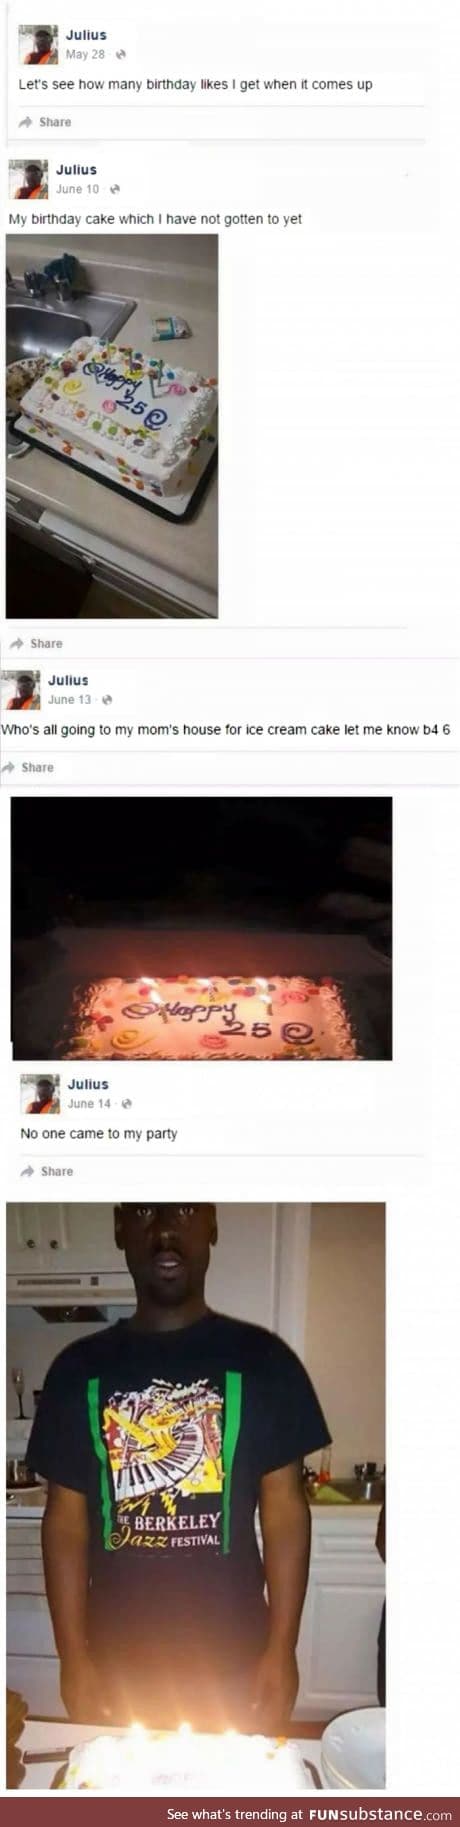 No-one came to Julius party, no-one liked any of his statuses